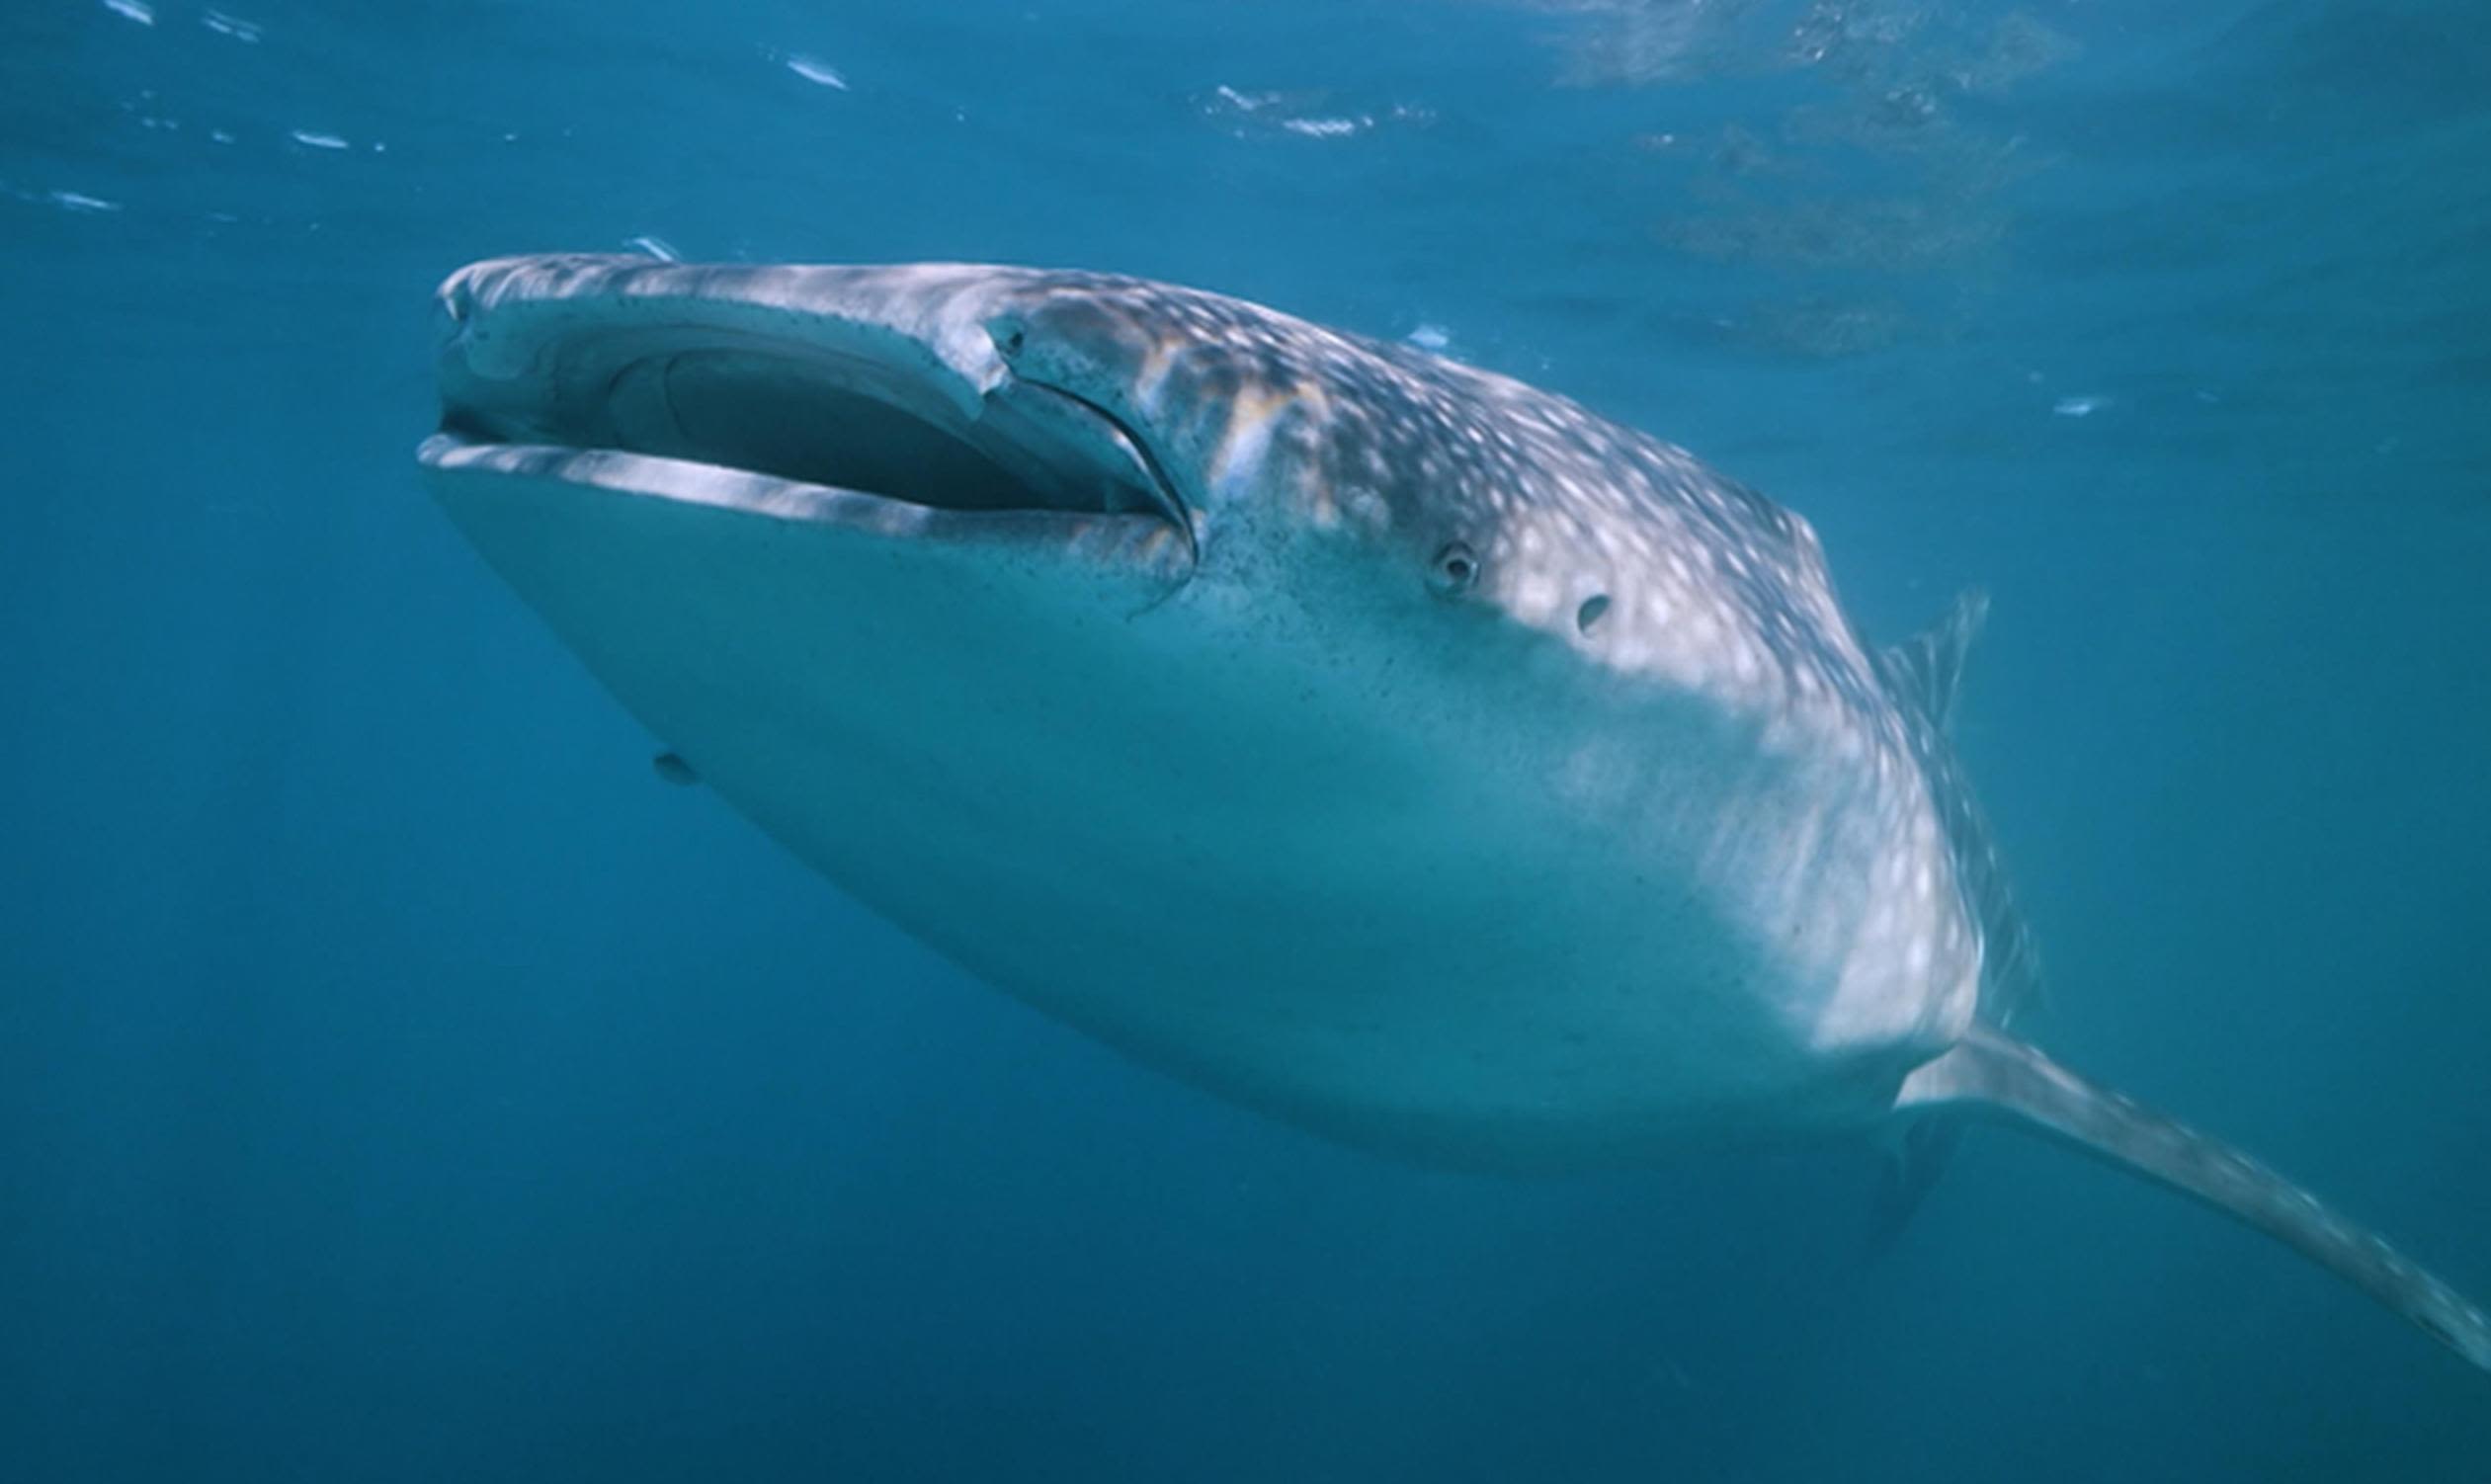 How NASA technology can help save whale sharks – the world's